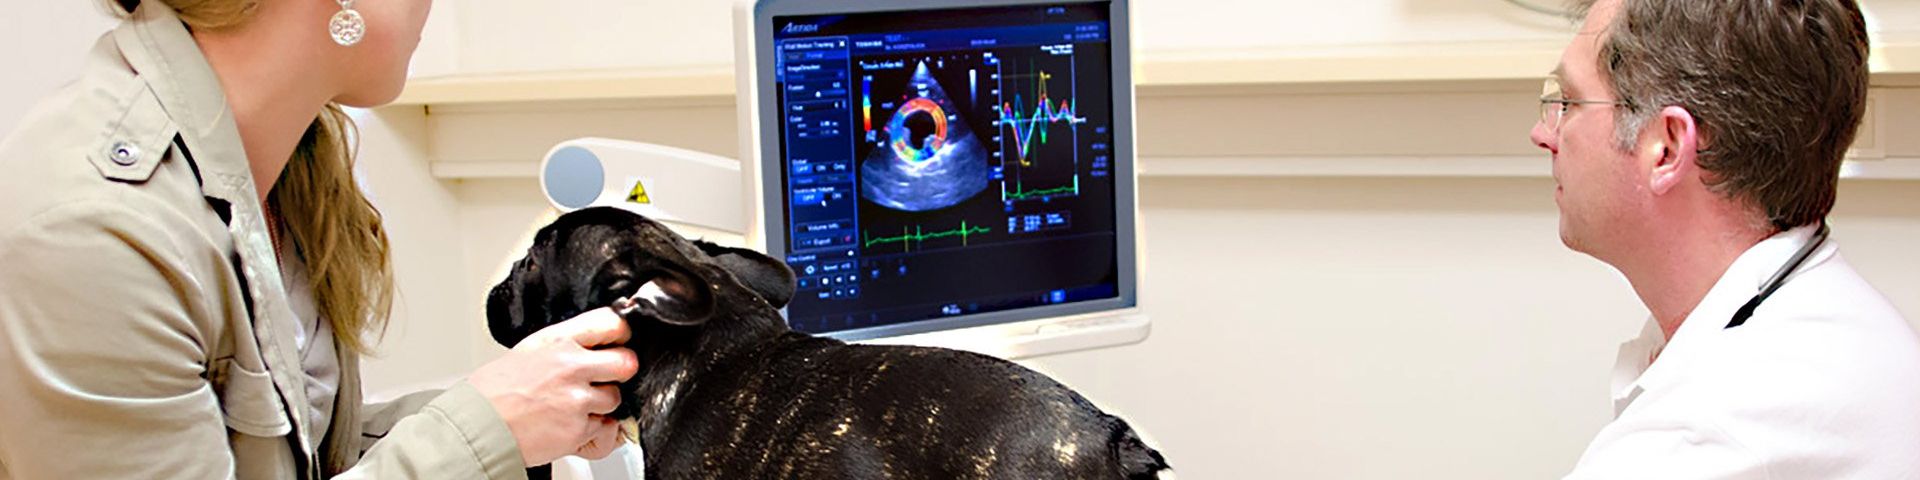 Dr Andreas Kosztolich diagnoses a dog using an Artida high-end Ultrasound system from Canon Medical (Image courtesy of Canon Medical Systems Europe VISIONS Magazine)